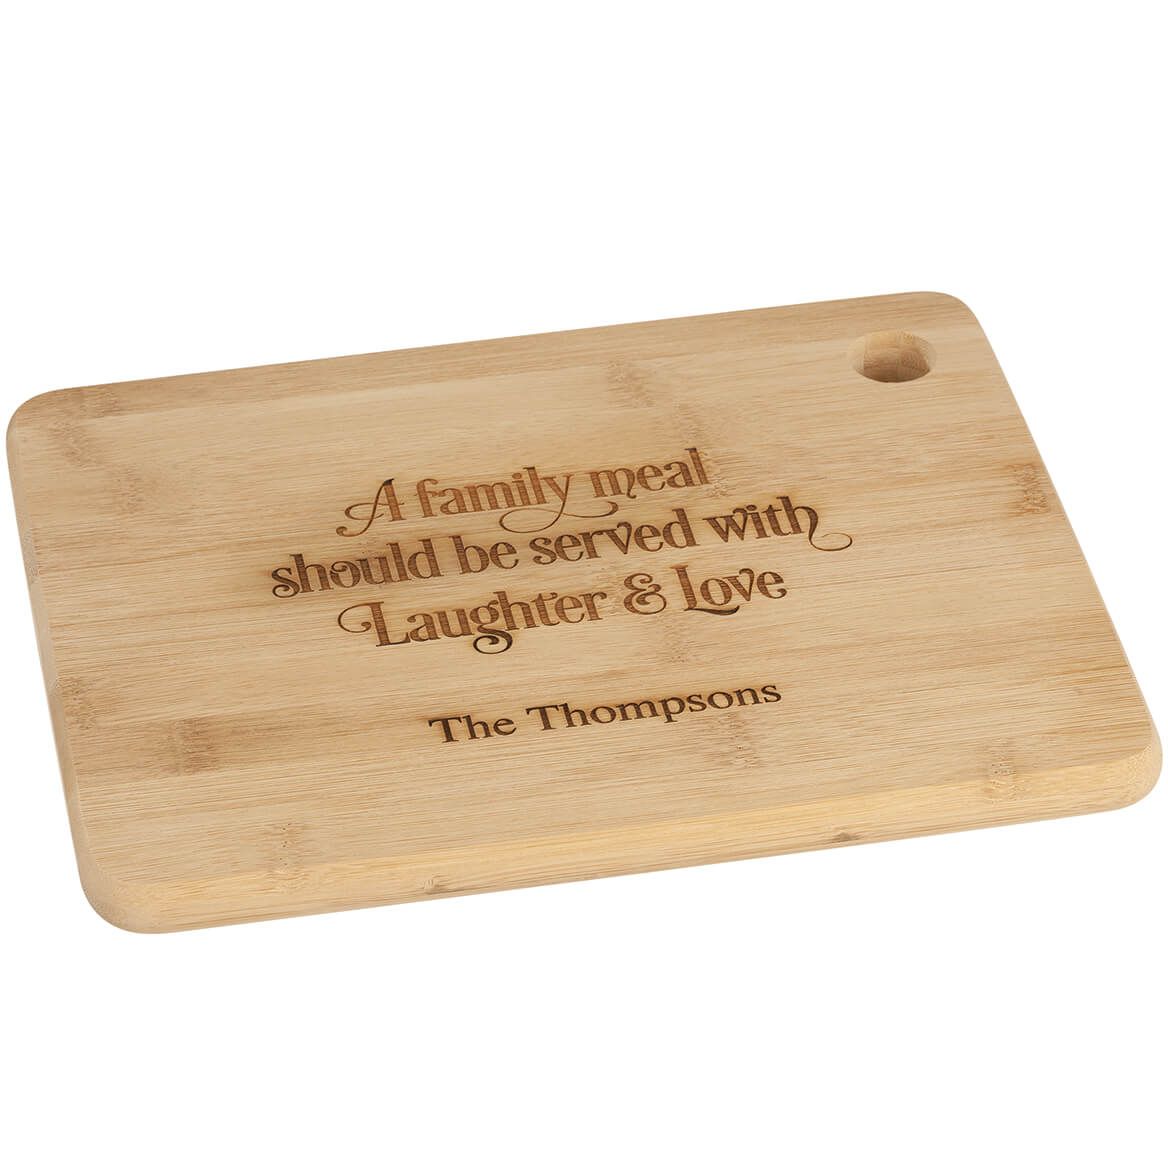 Personalized "A Family Meal" Cutting Board + '-' + 374404